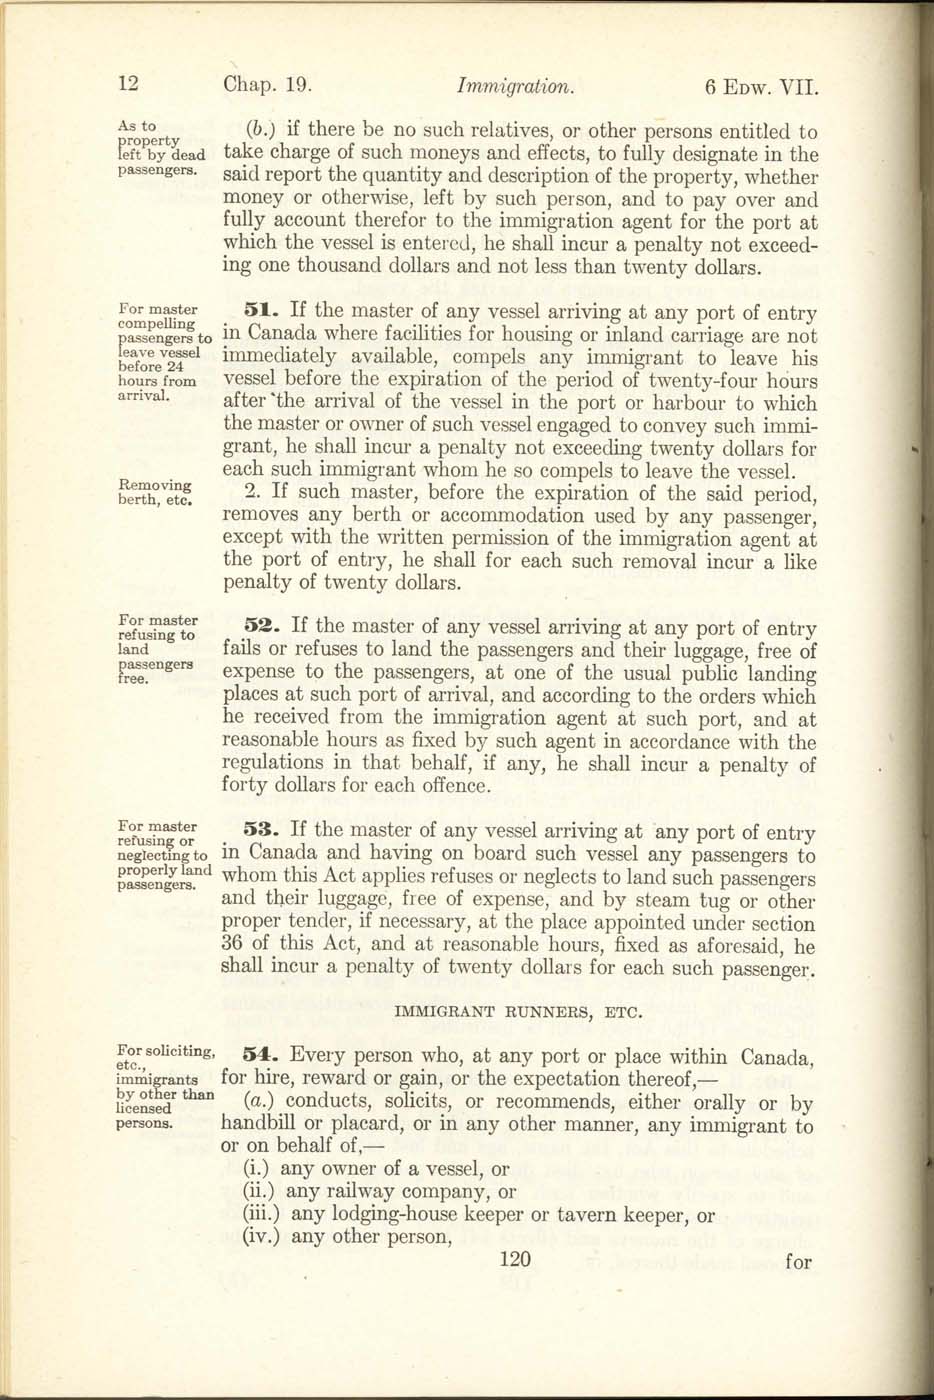 Chap. 19 Page 120 Immigration Act, 1906